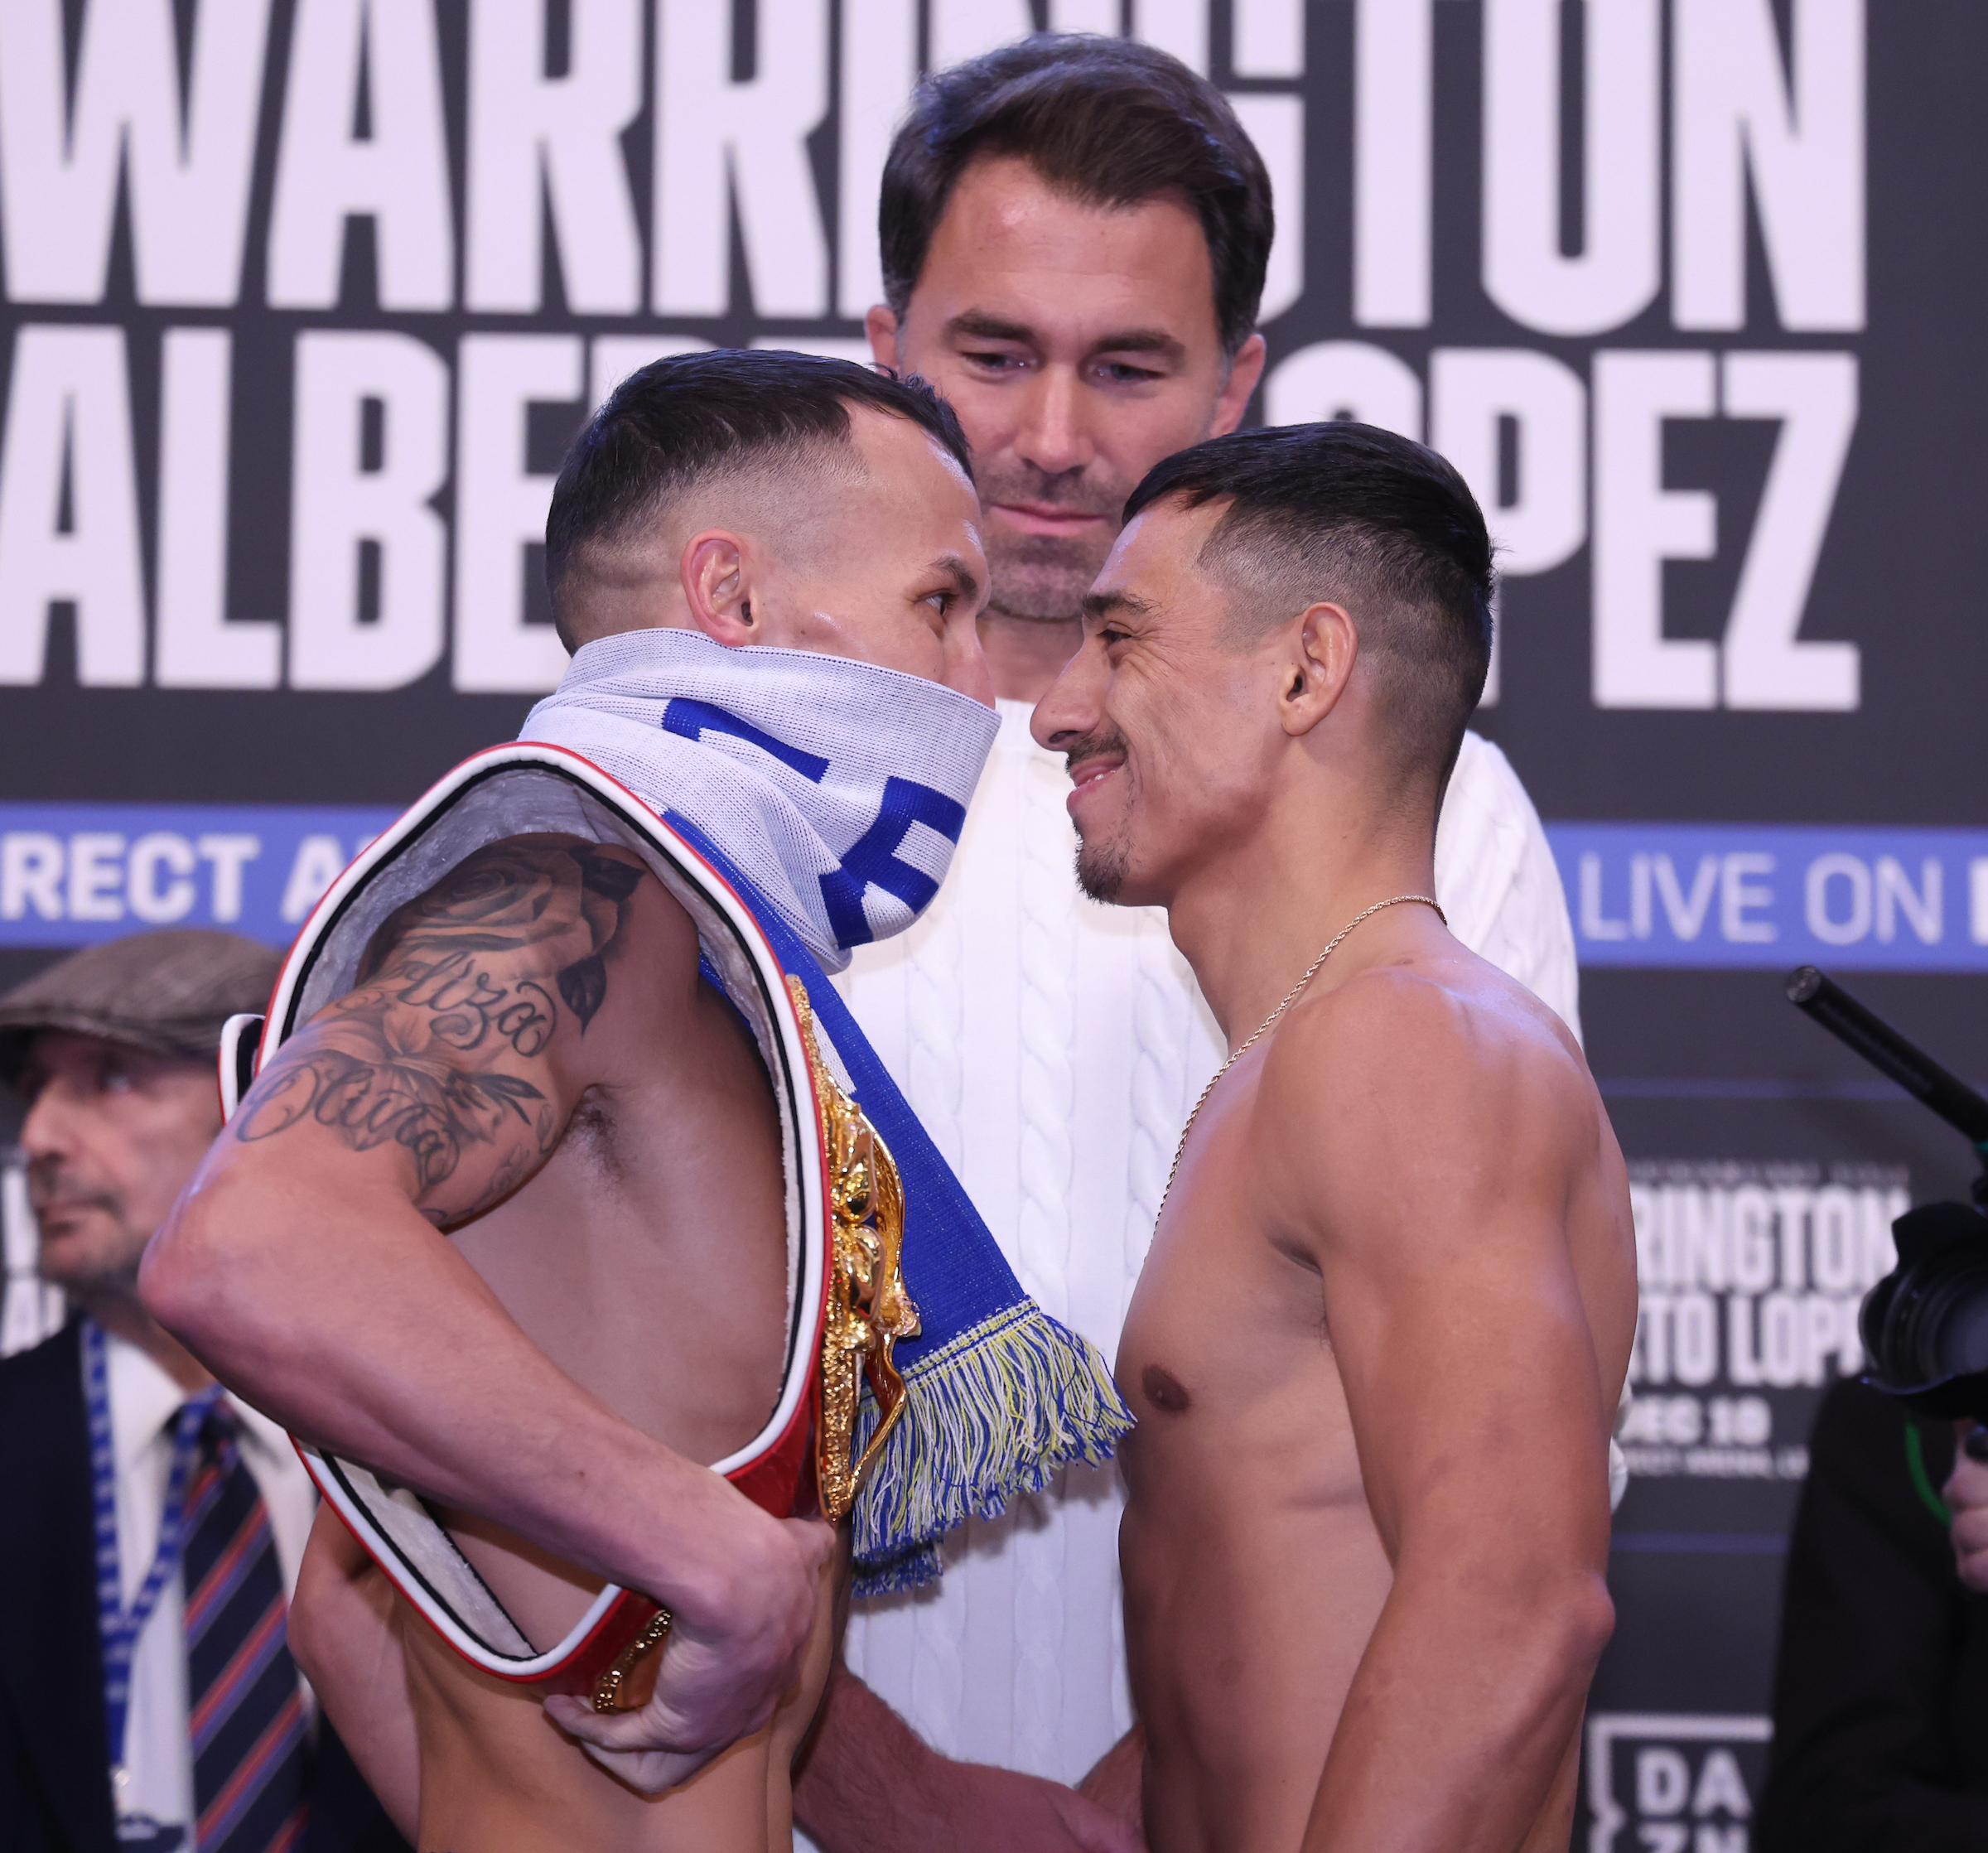 Josh Warrington faces Luis Alberto Lopez in a DAZN main event today from Leeds